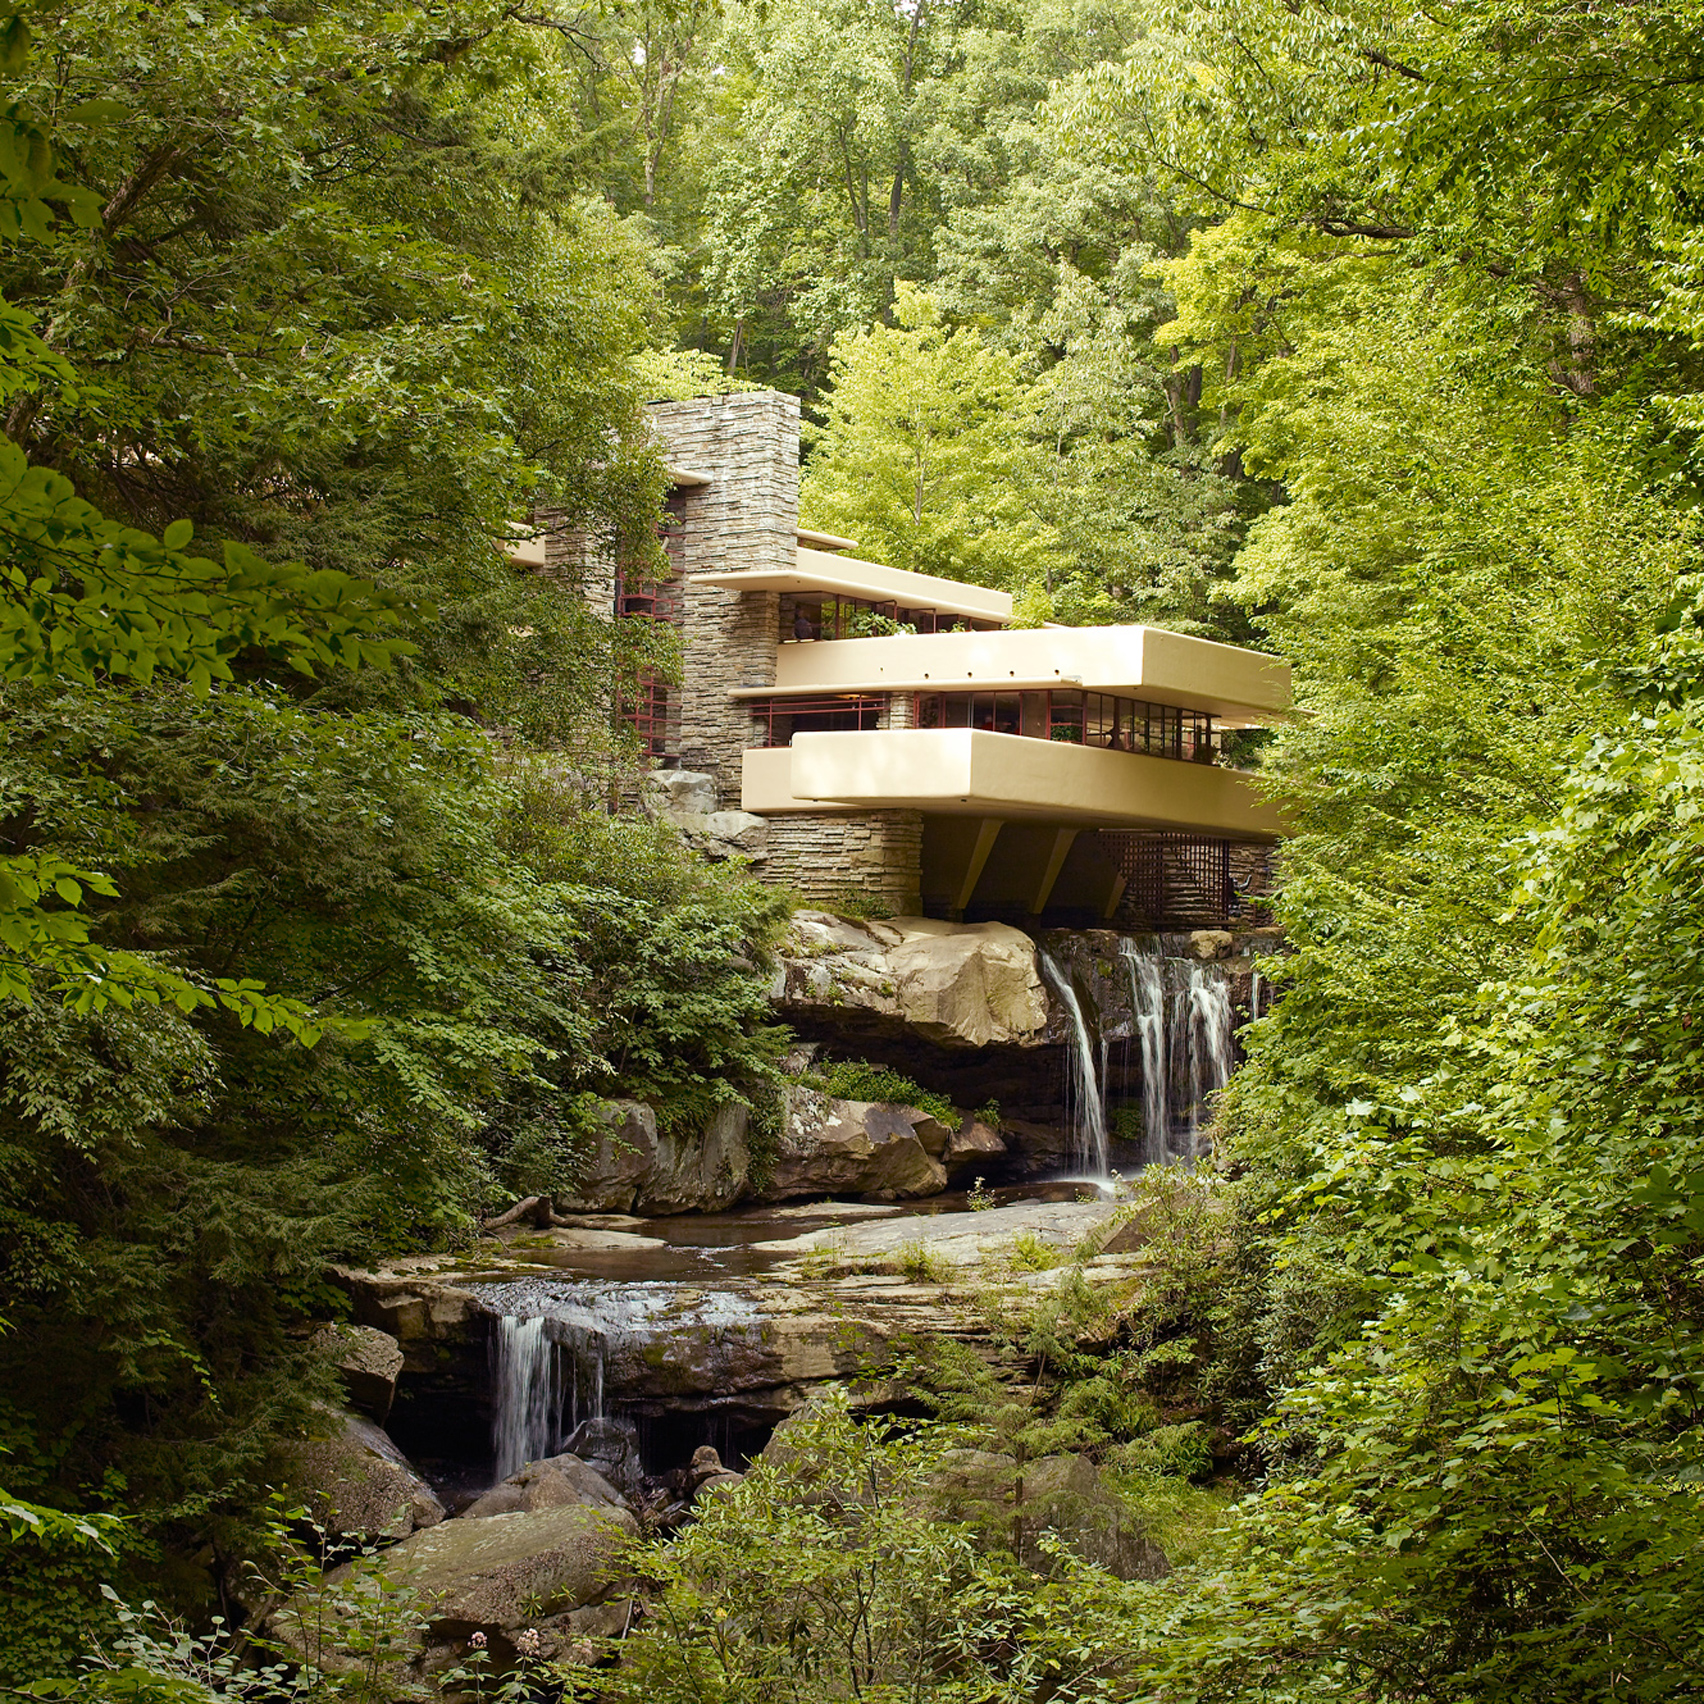 Frank Lloyd Wright buildings re-nominated for World Heritage List